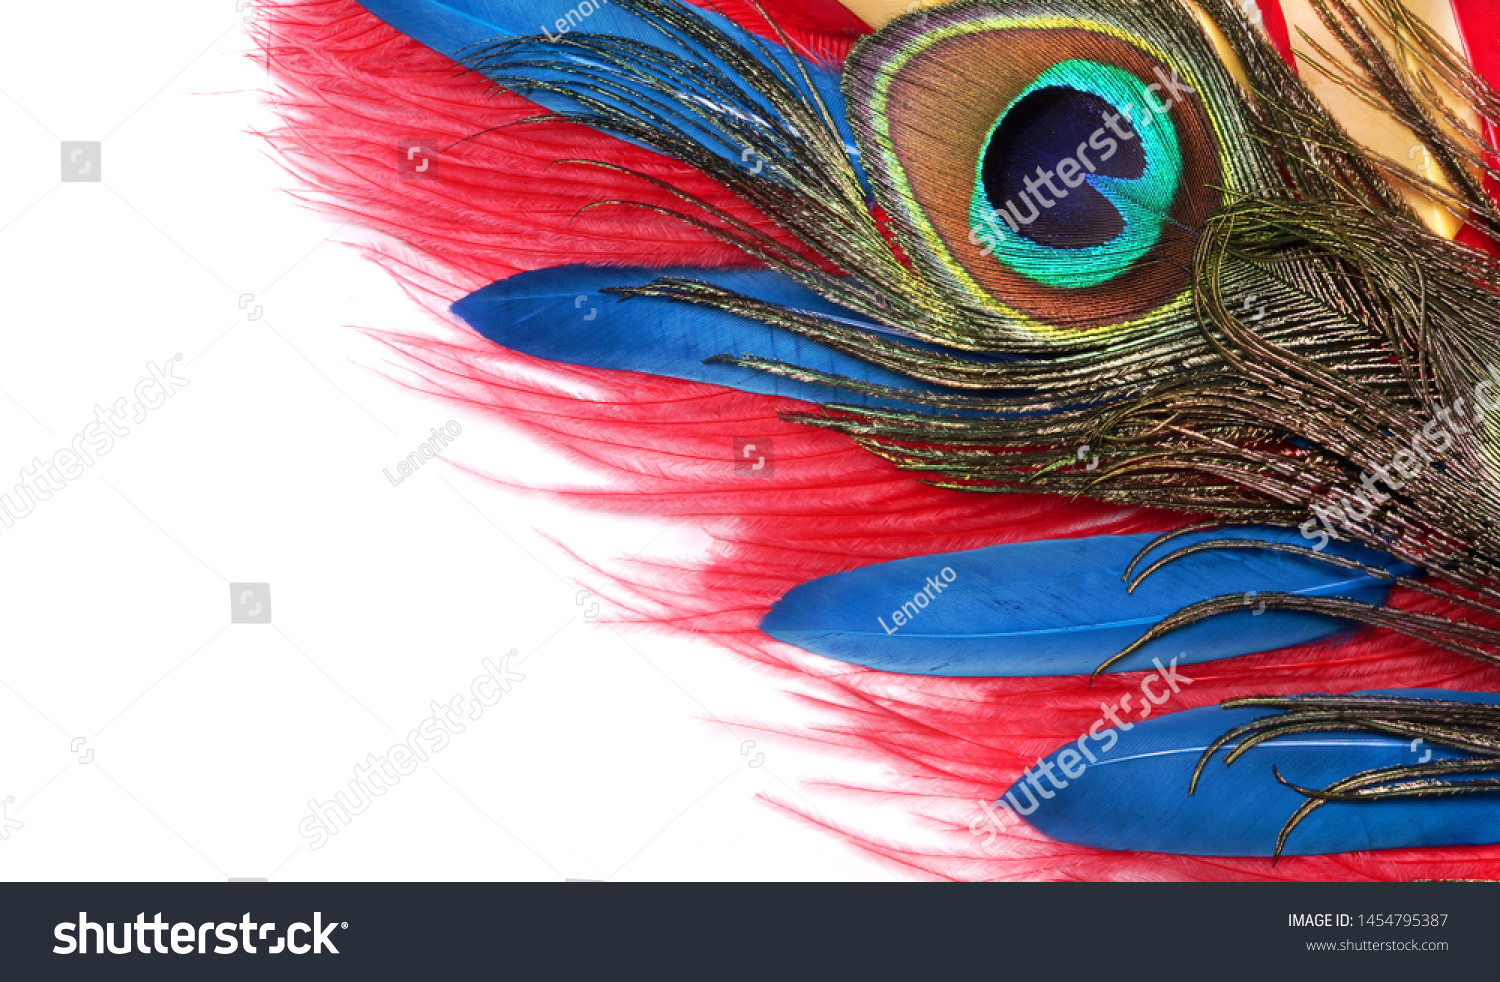 Peacock feathers on white background. Carnival. Colored feather. #1454795387